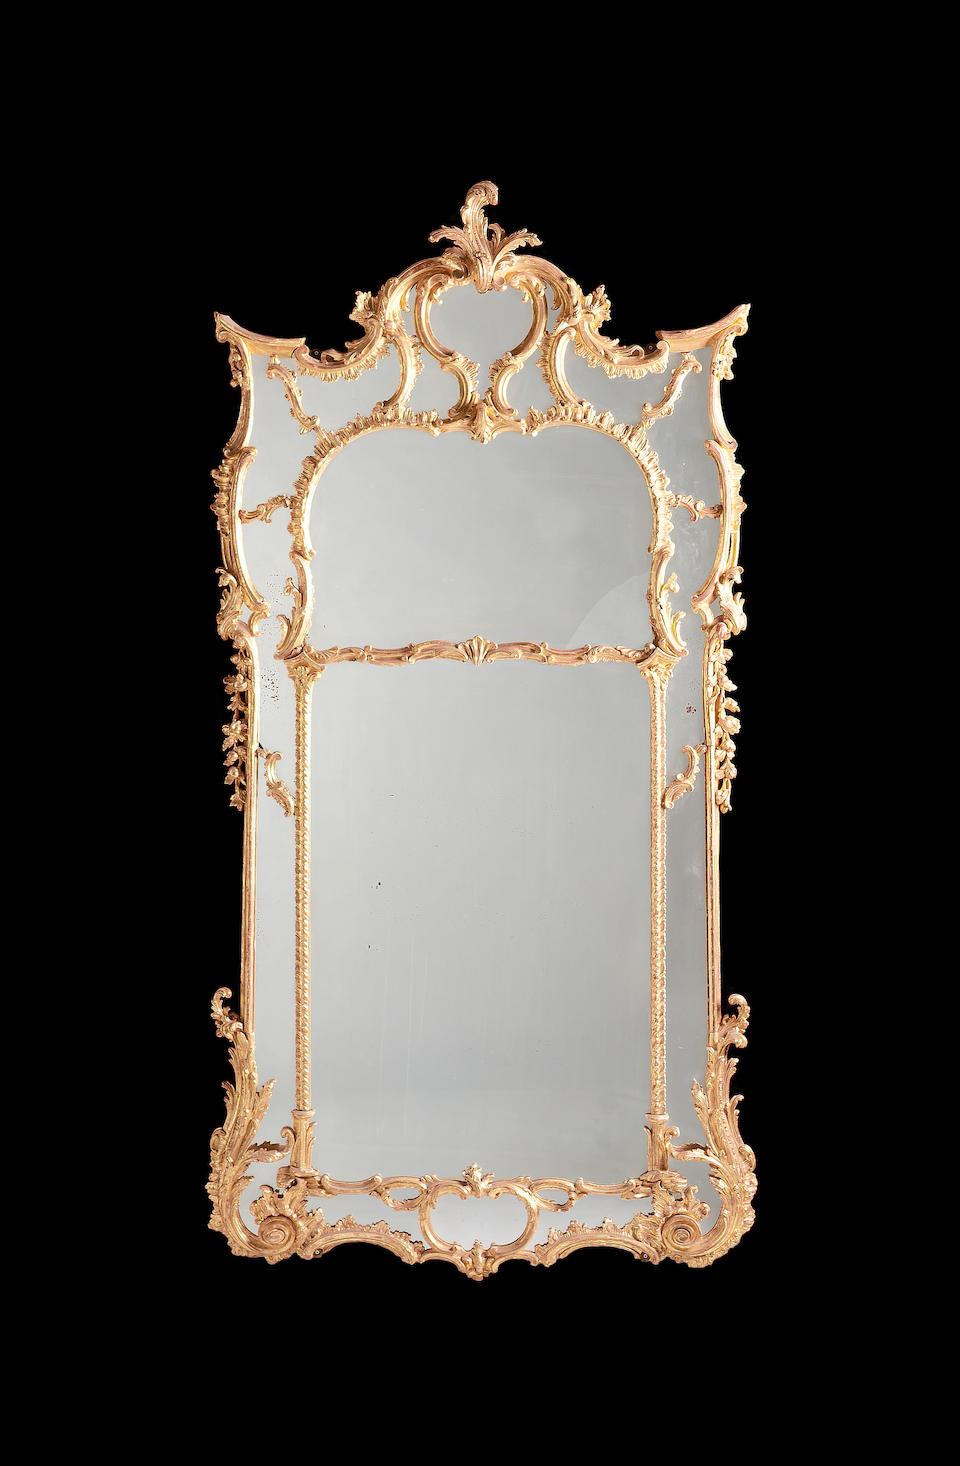 A pair of large George II style giltwood mirrors in the Chippendale style